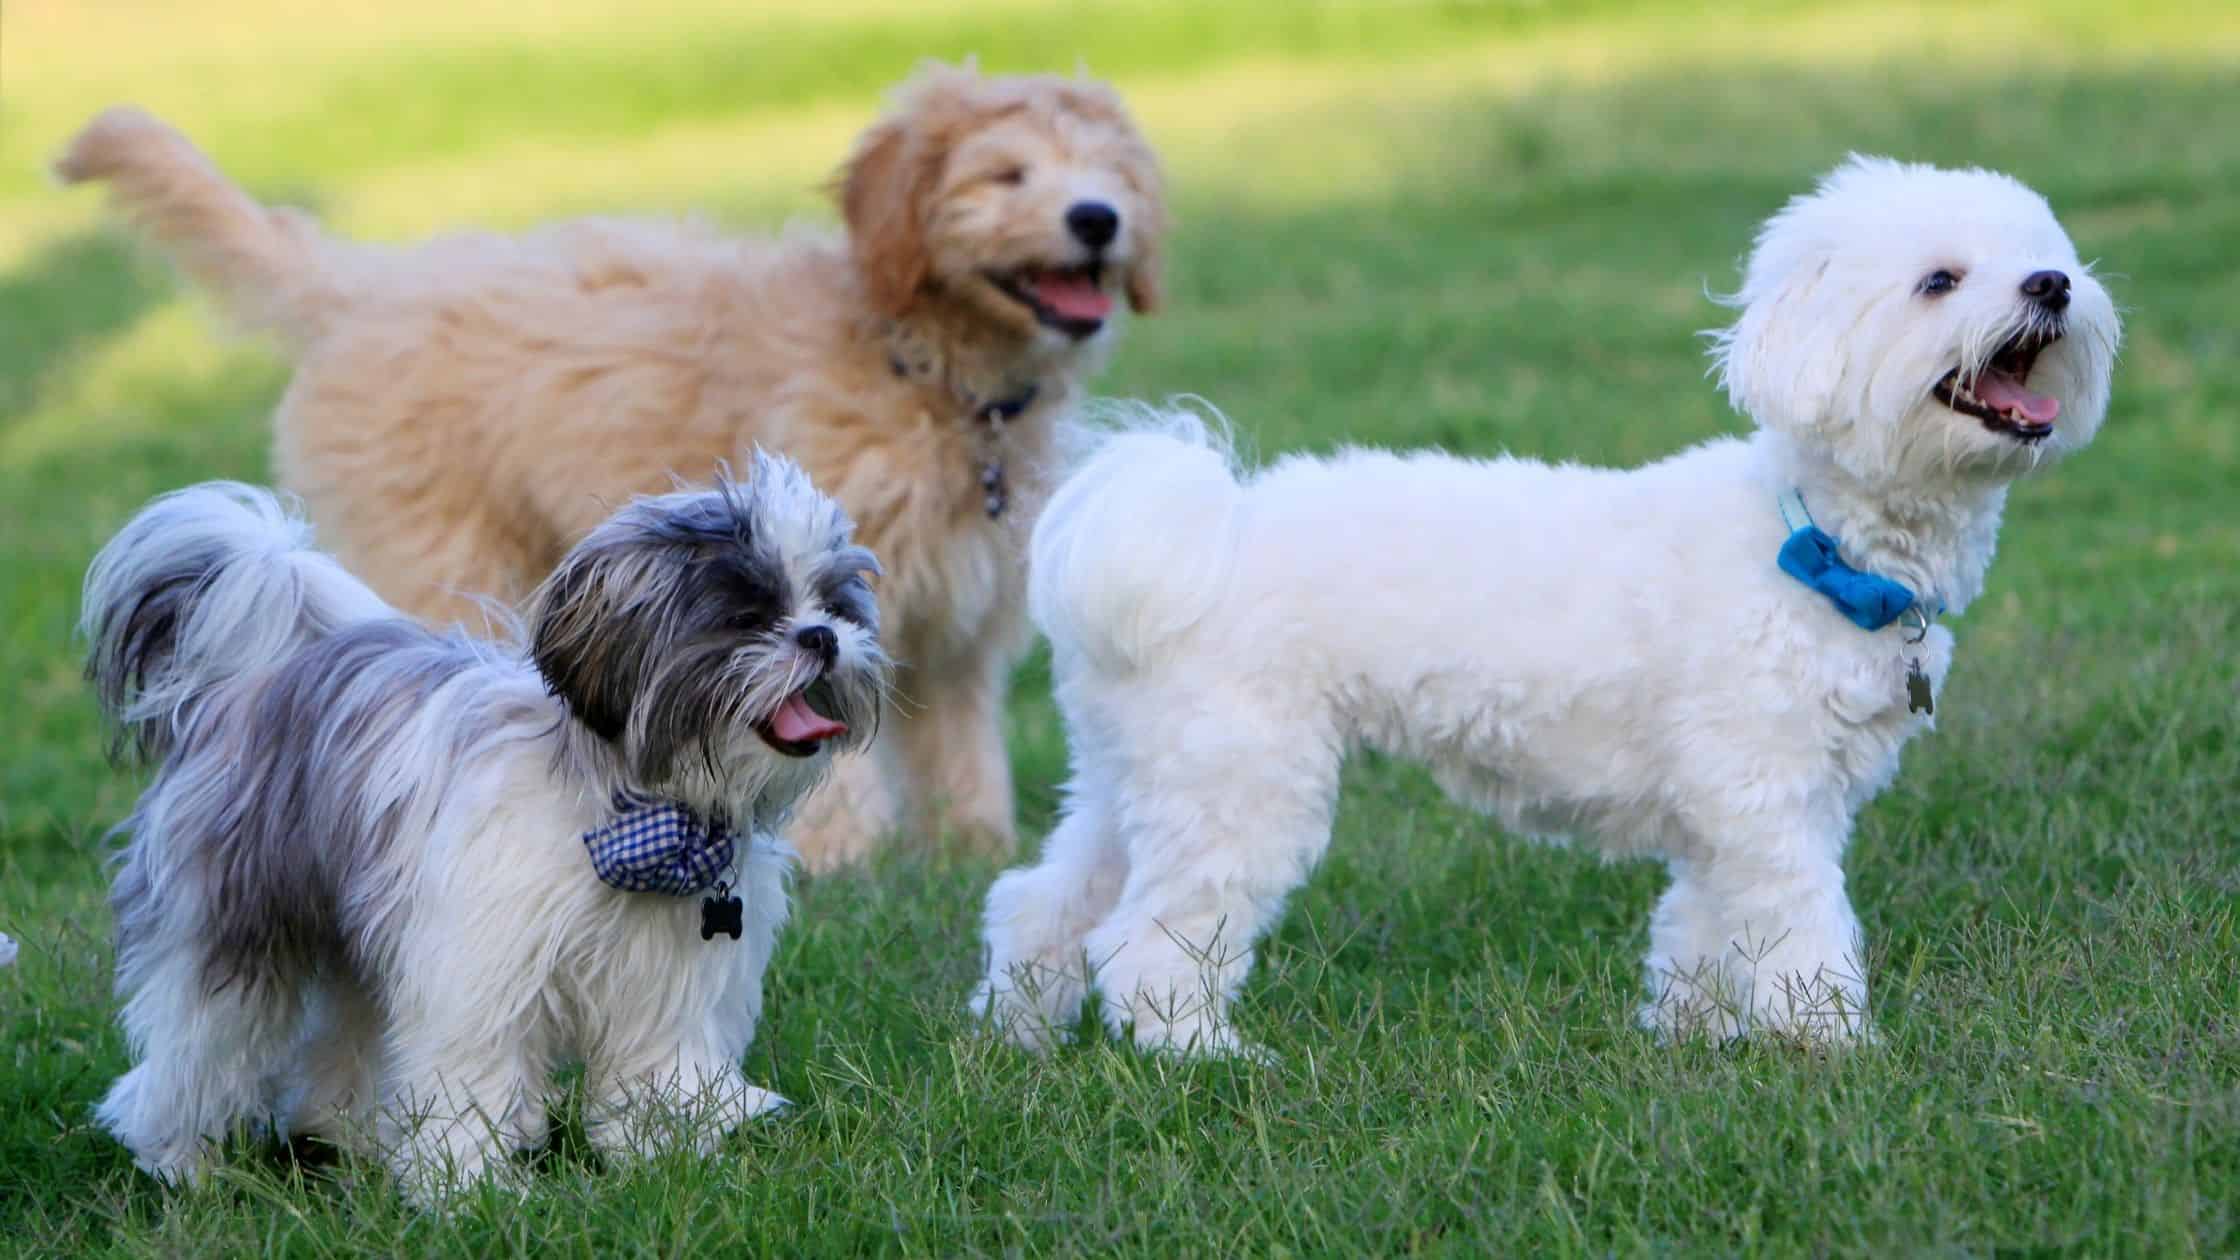 Ways to help socialize your dogs